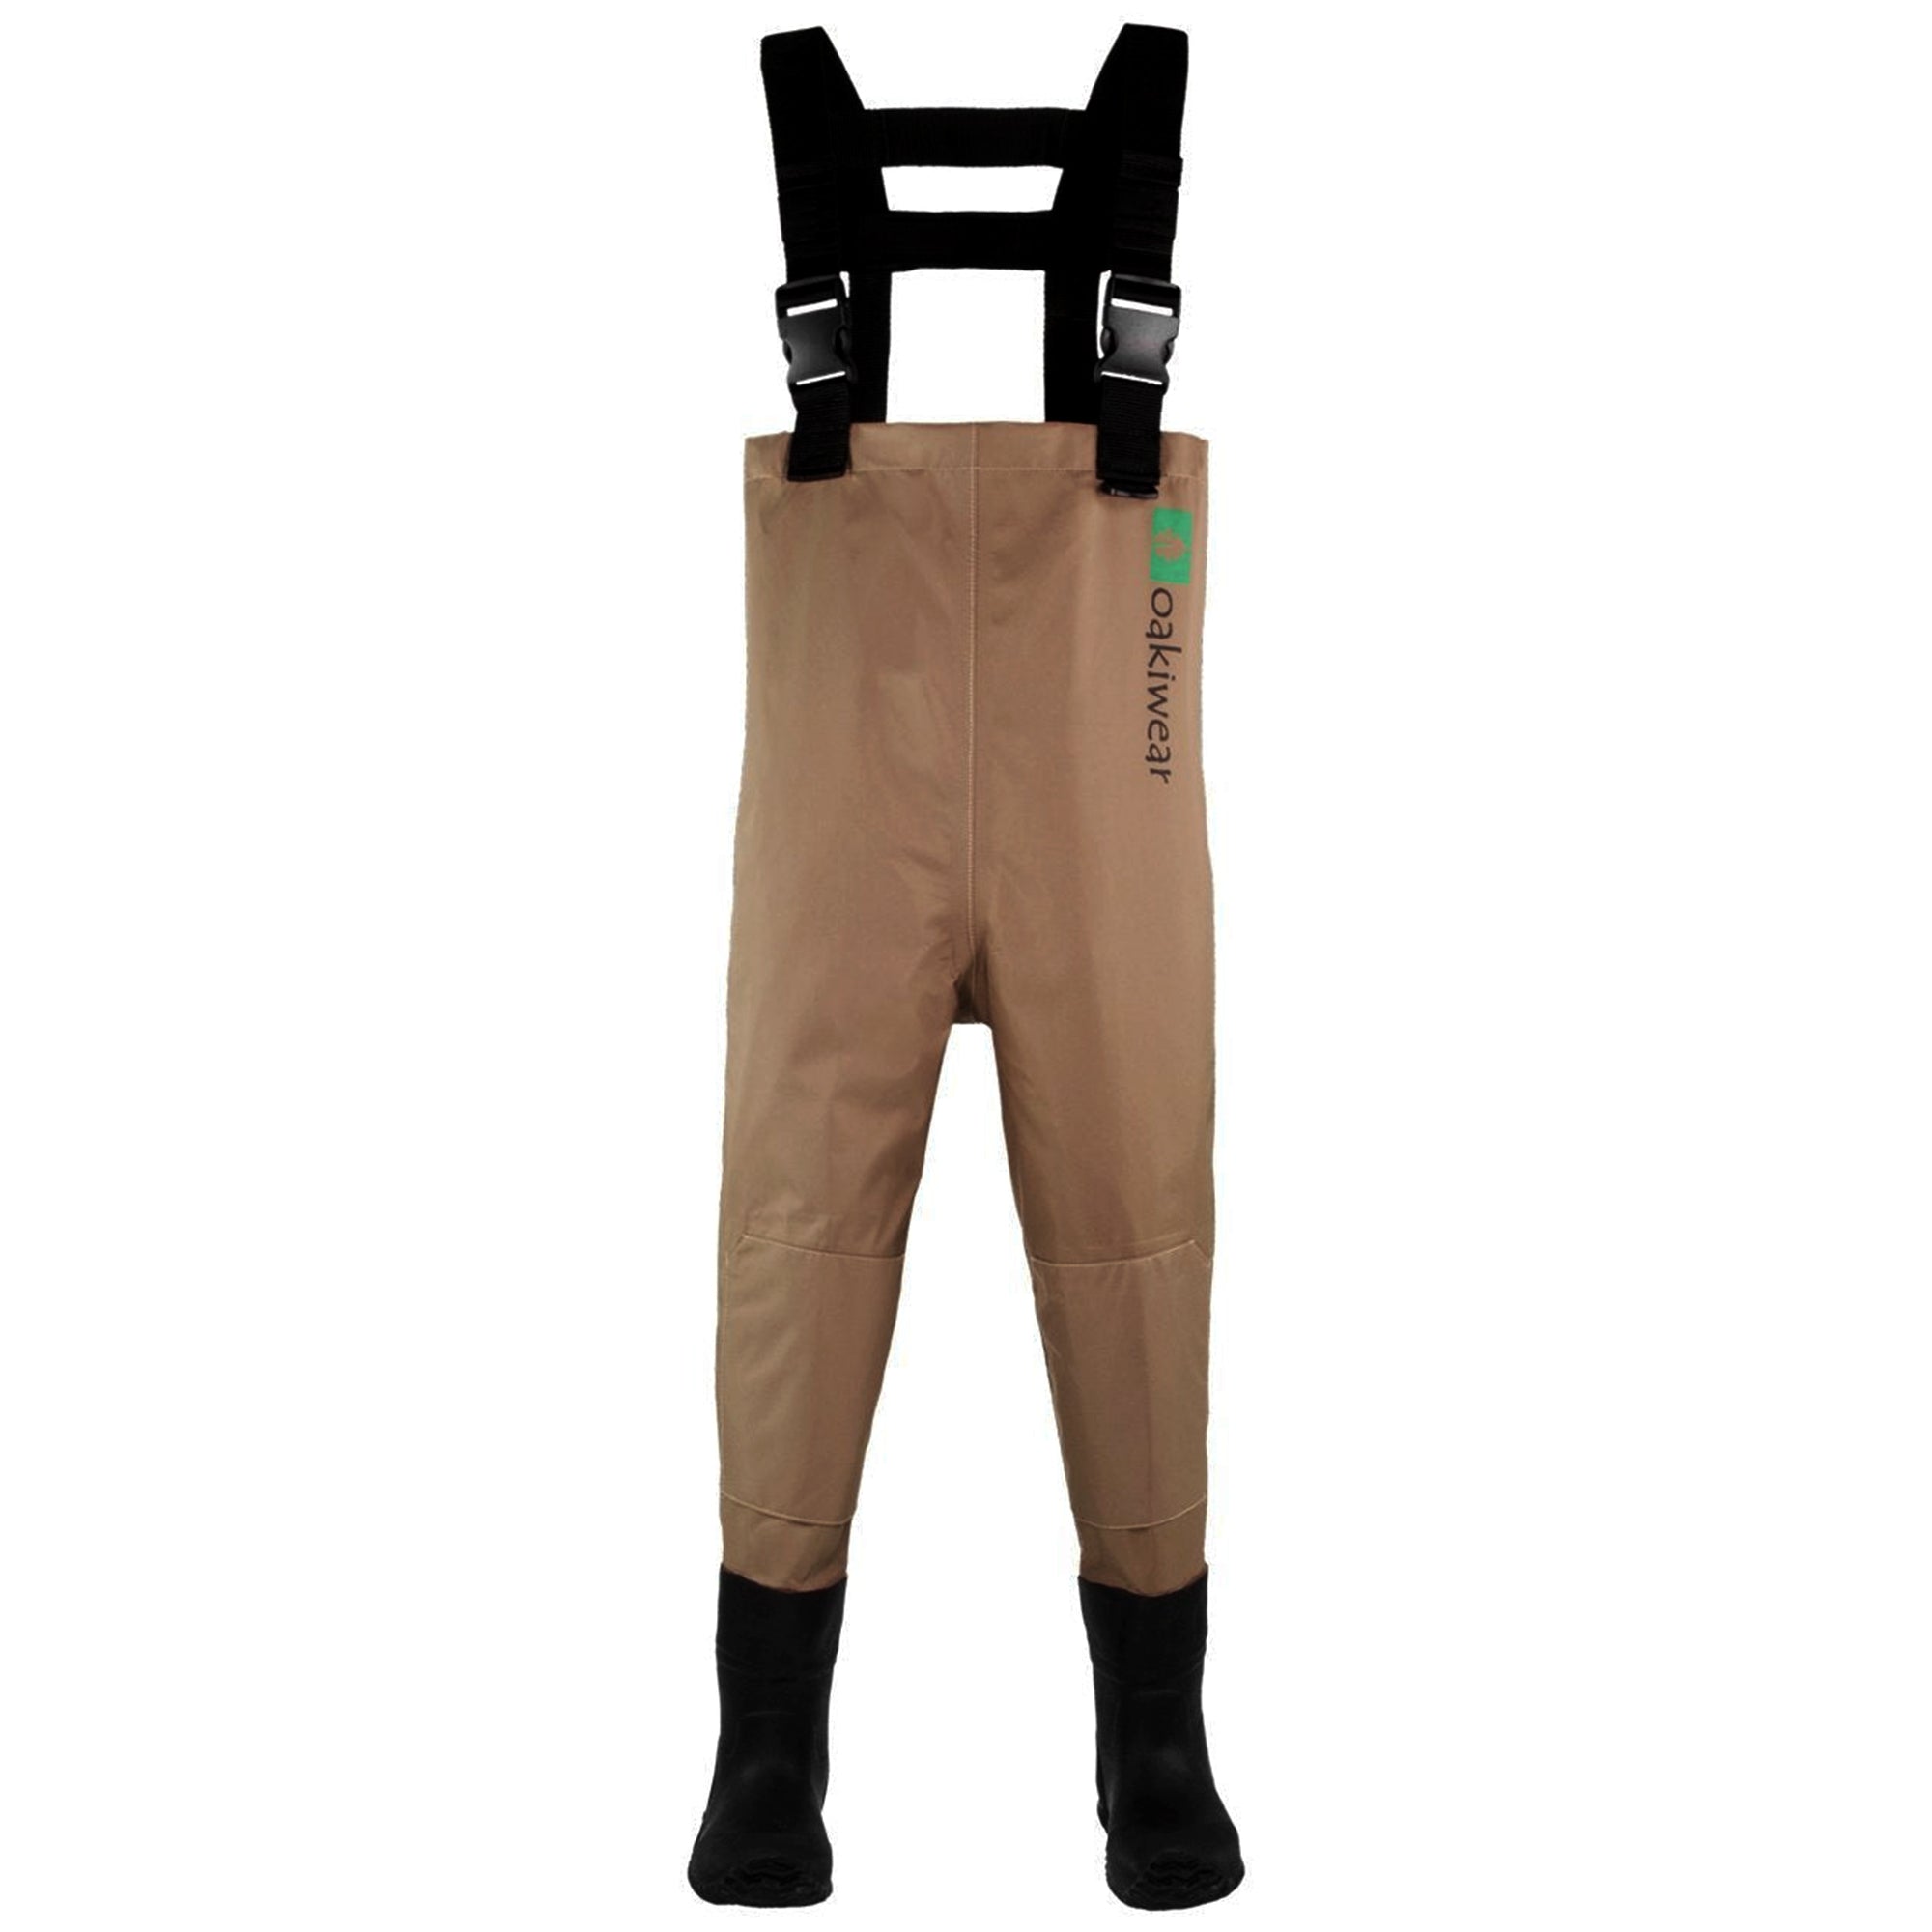 Children's Tan Breathable Waders, 8/9